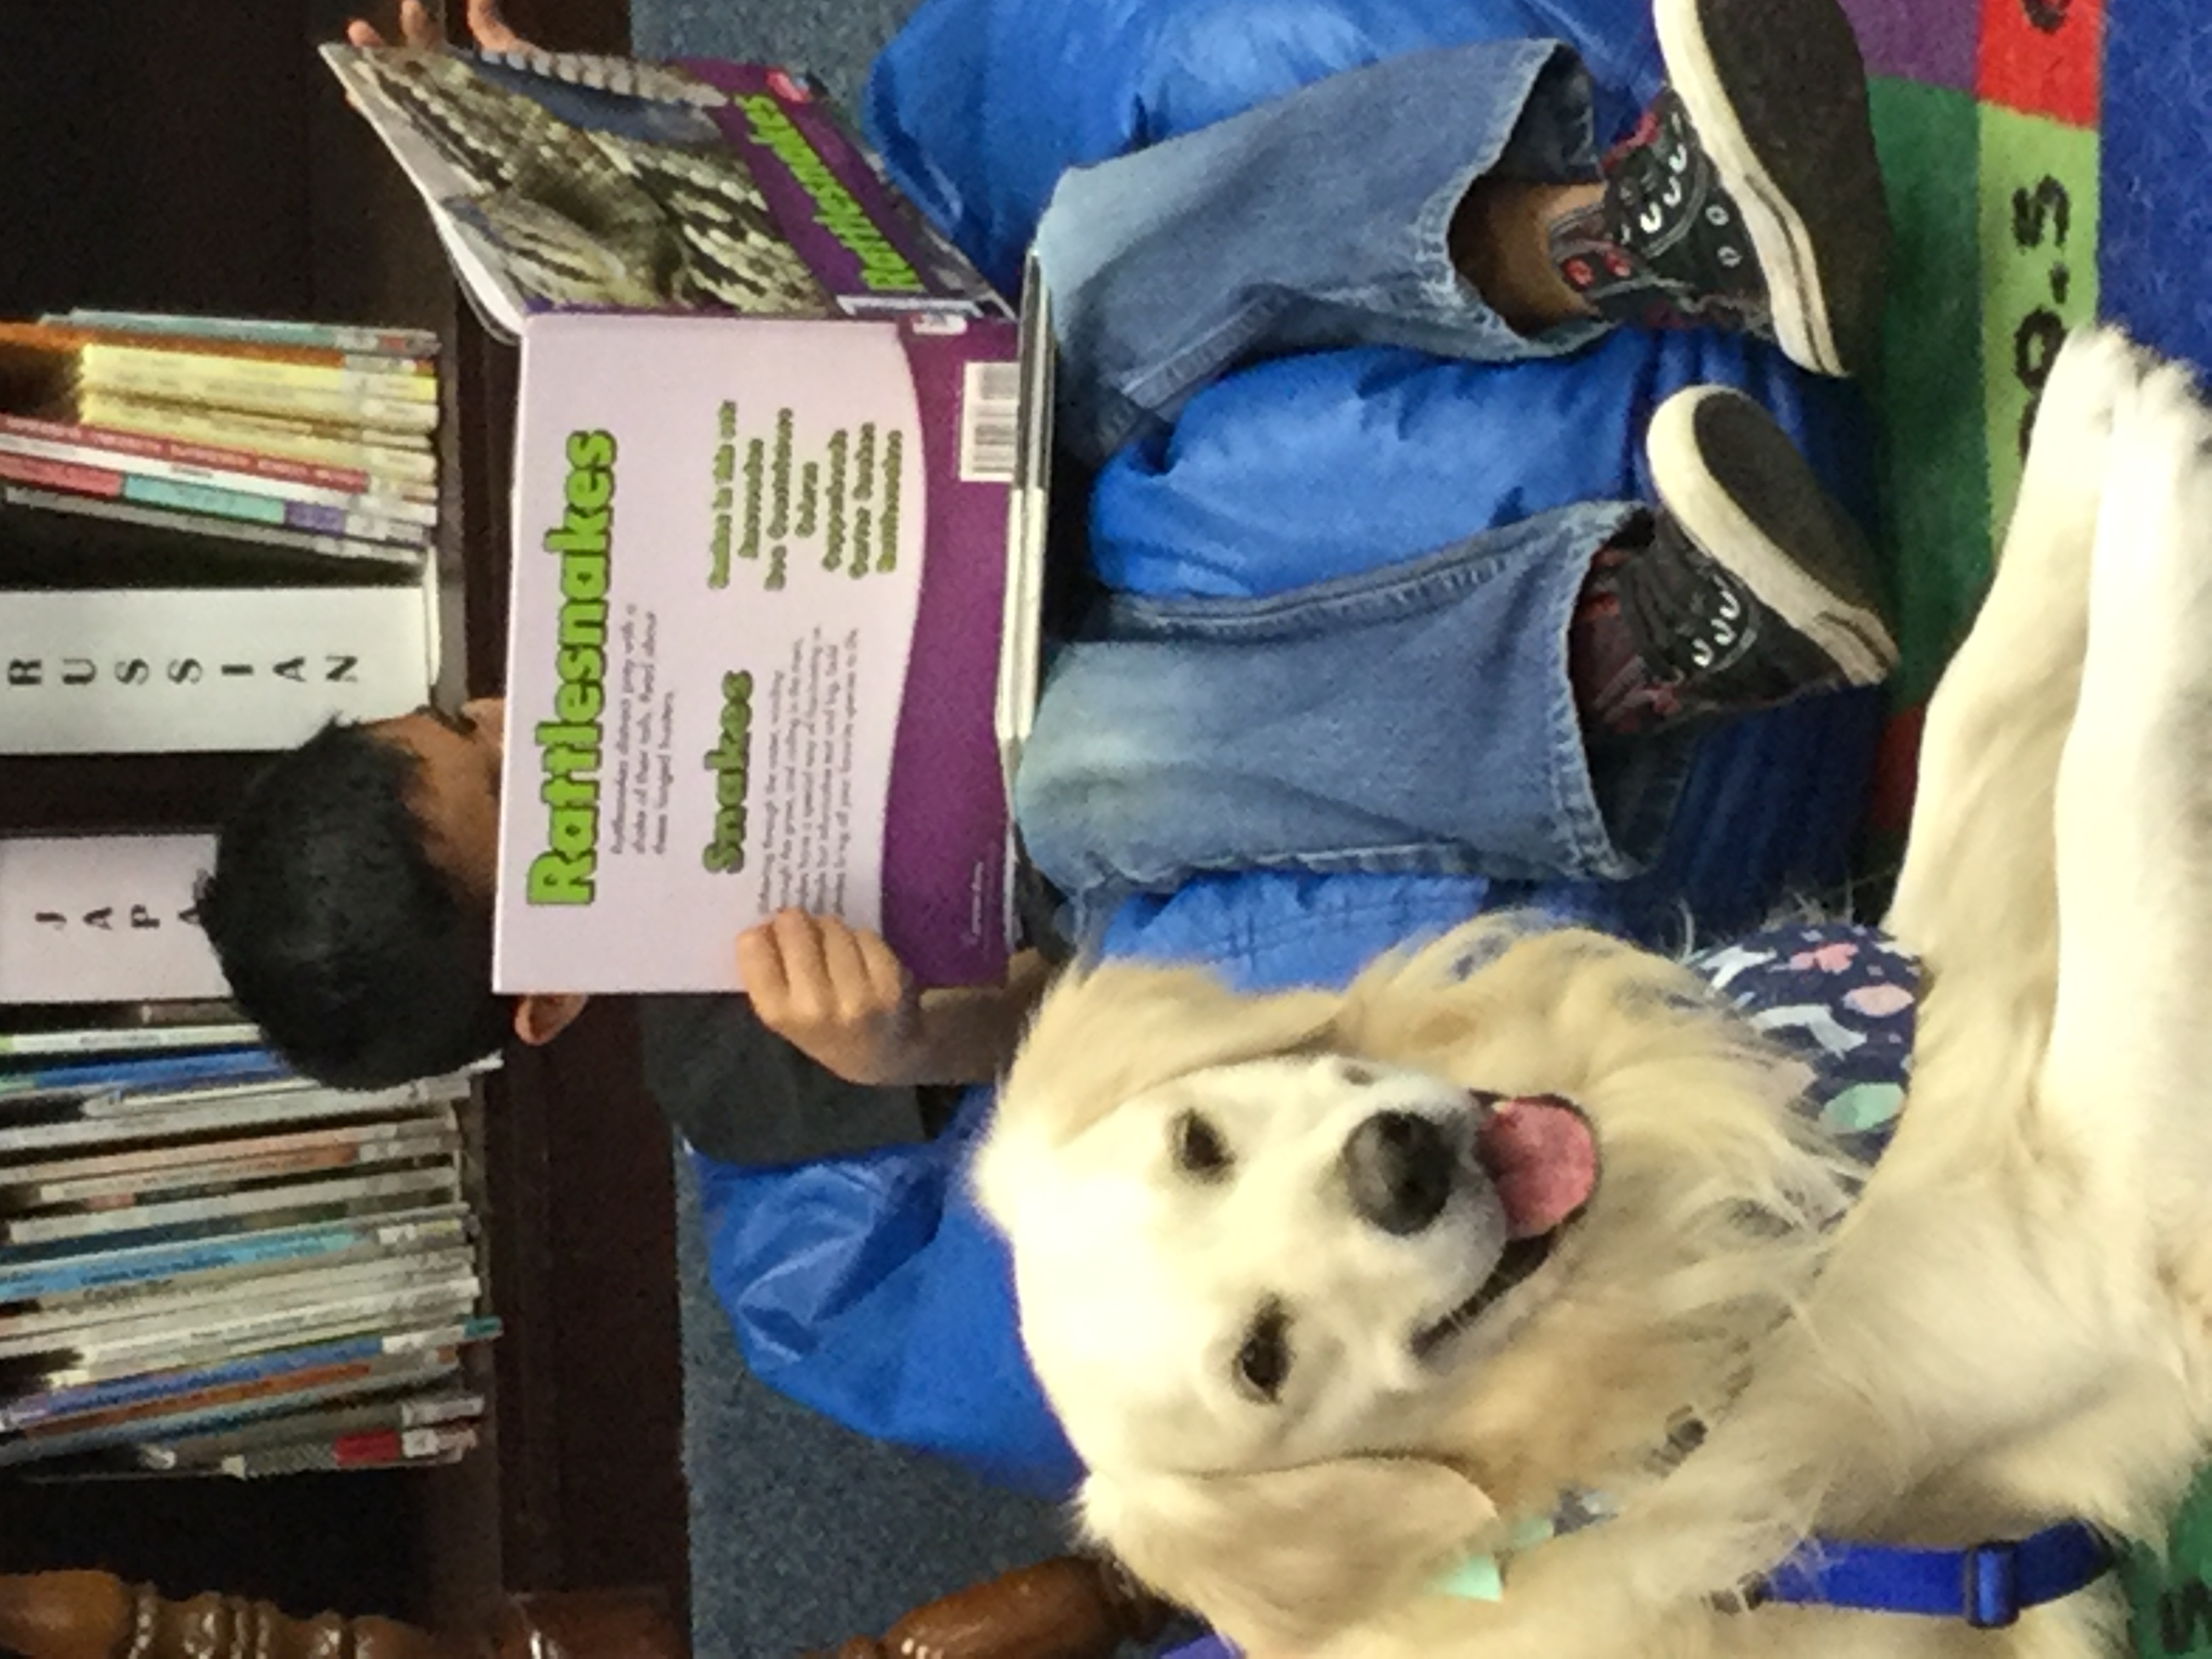 Paws up to Reading- Student is reading to the dog